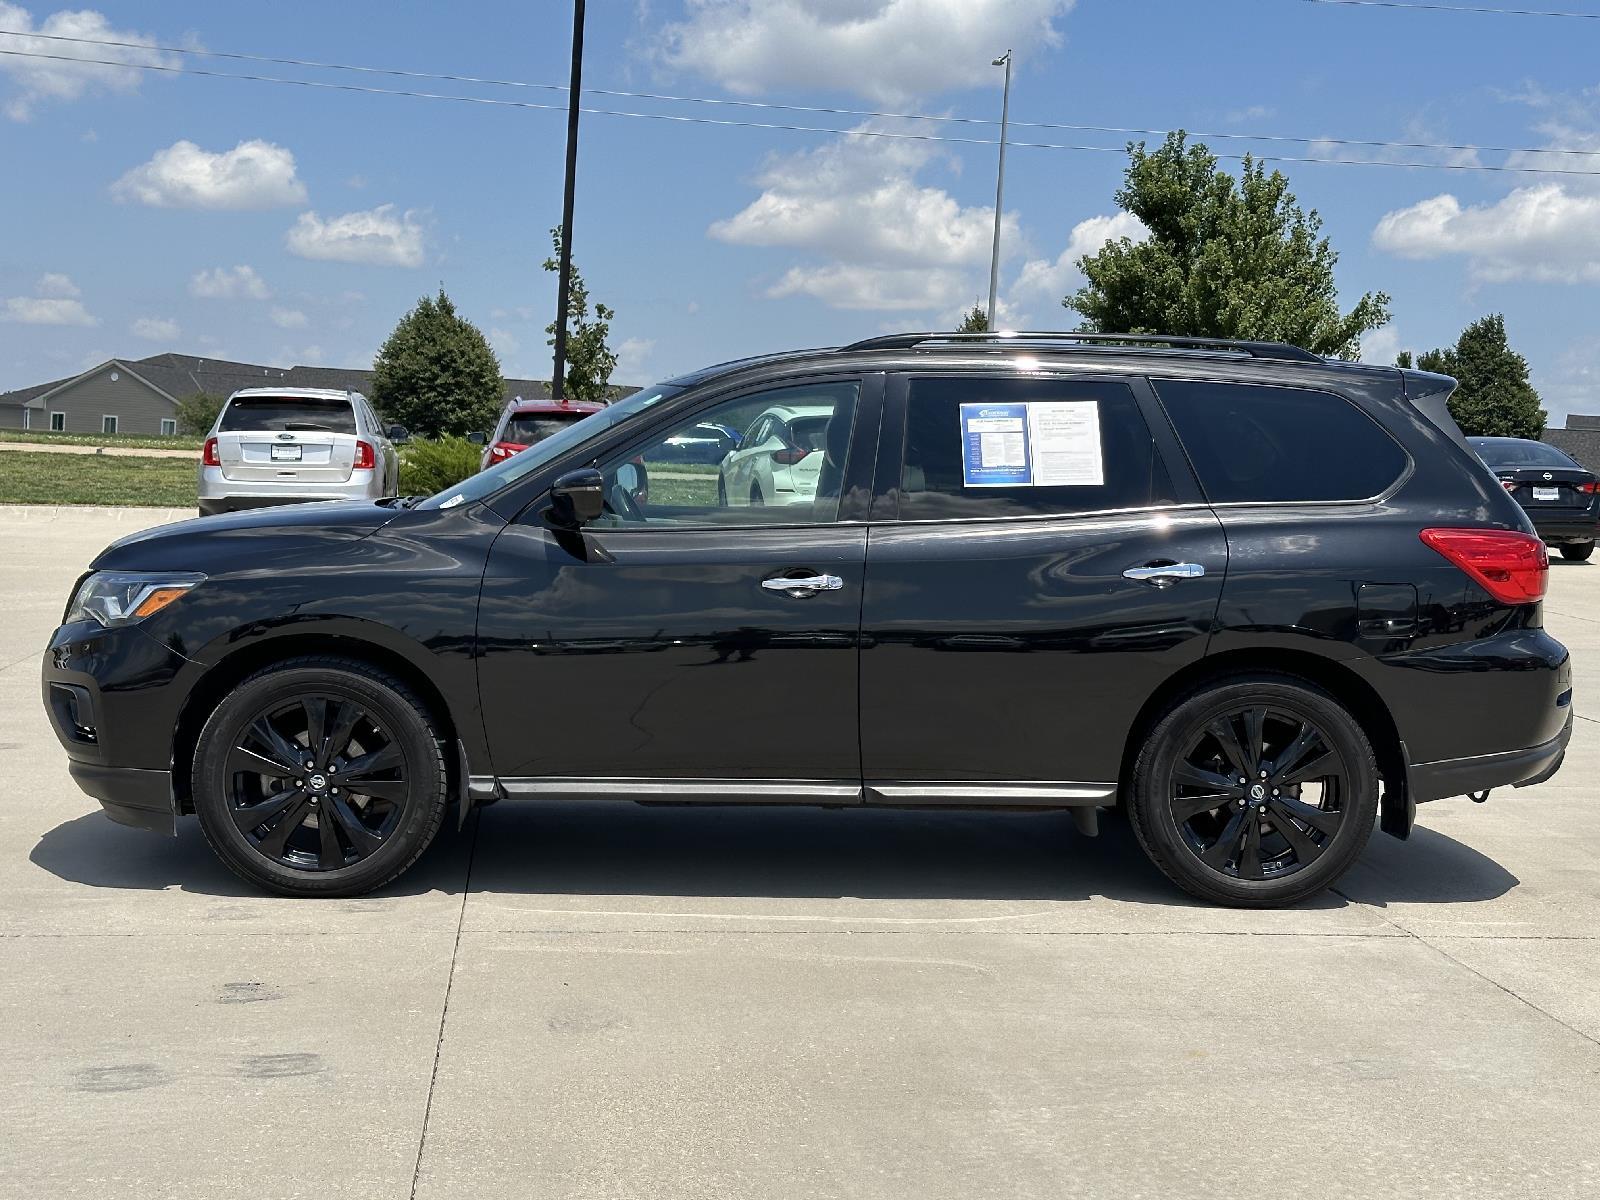 Used 2018 Nissan Pathfinder SL SUV for sale in Lincoln NE